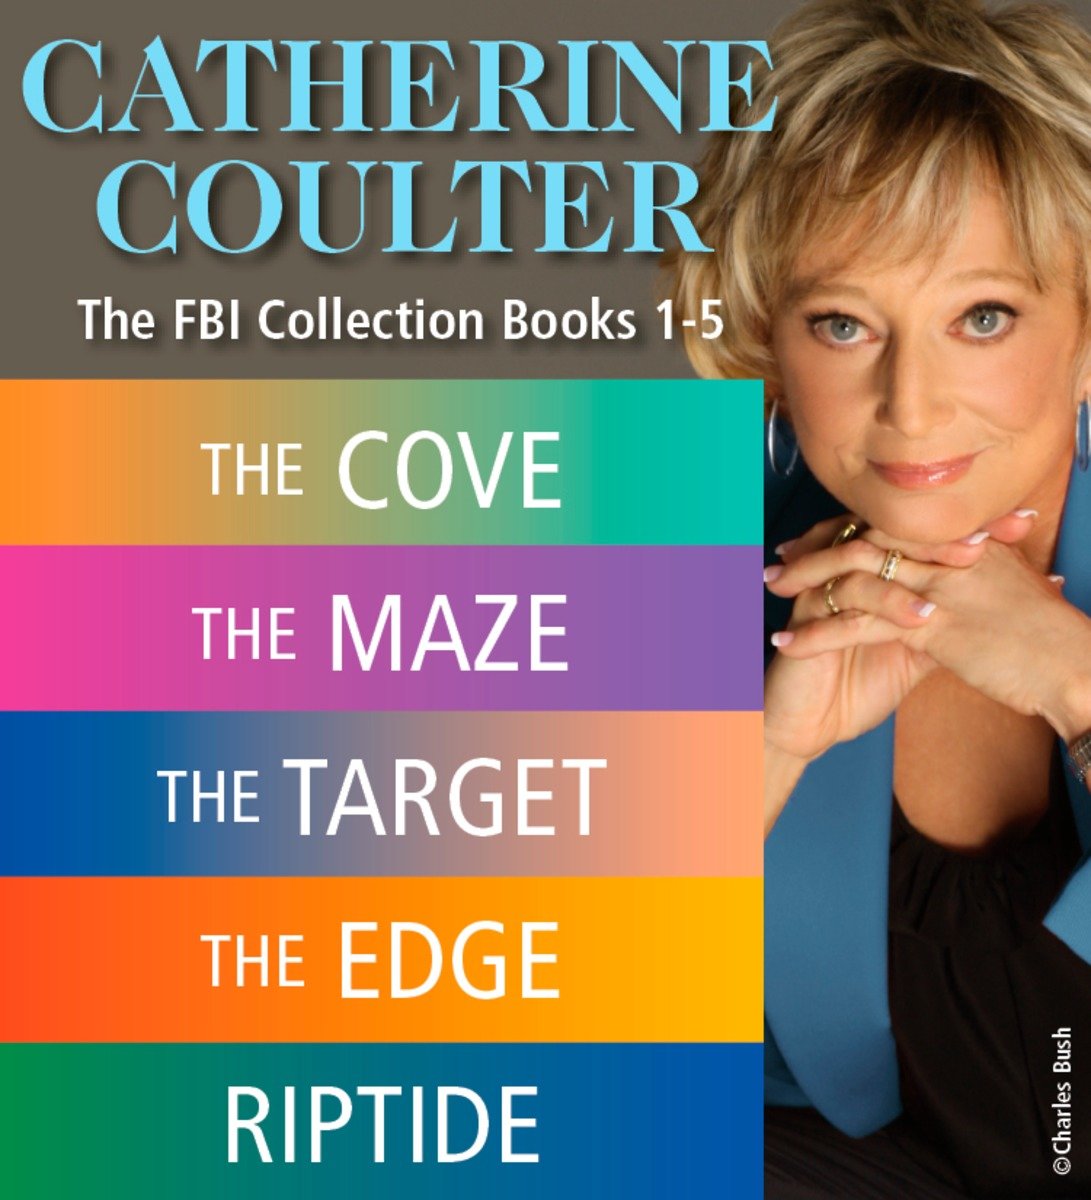 Catherine Coulter the FBI thrillers collection Books 1-5 cover image